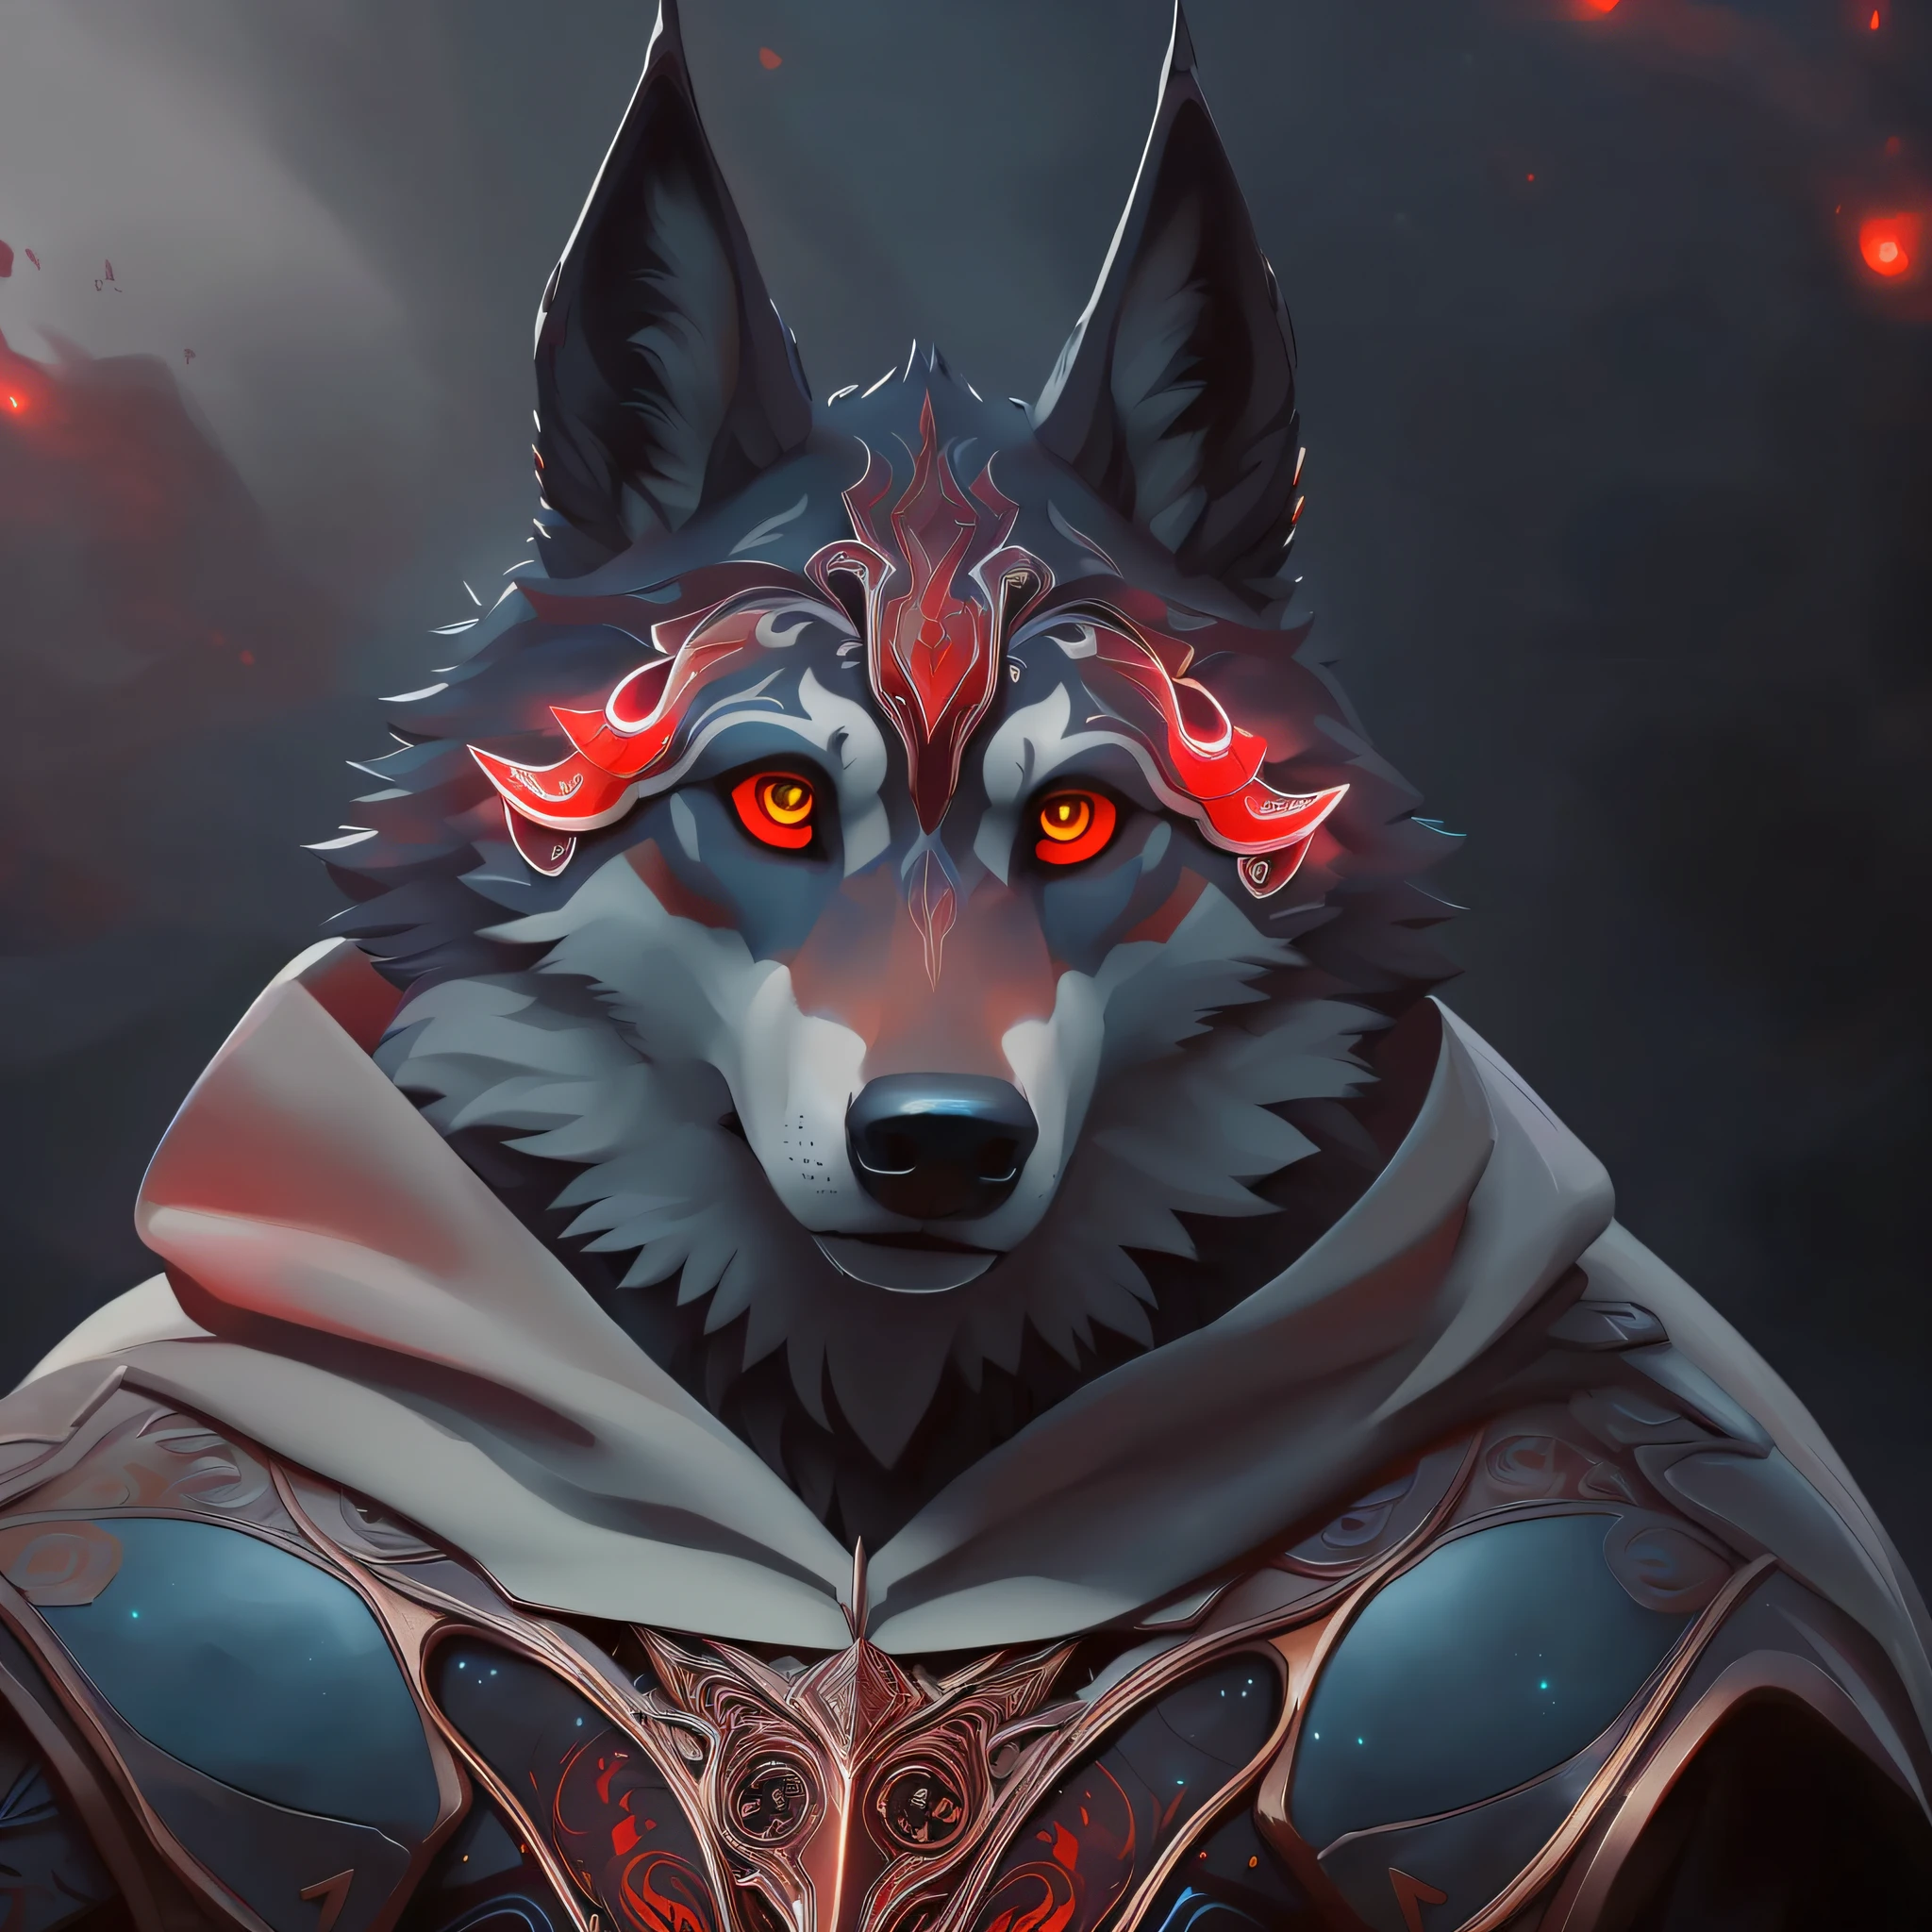 there is a wolf with glowing eyes and a hood attached, fantasy wolf portrait, anthropomorphic wolf, an anthropomorphic wolf, Wolf Armor, painted in arcane style, 8k high quality detailed artwork, Kitsune-inspired Armor, den wolf face, Epic Fantasy Digital Art Style, Epic fantasy art style, Husky in shining armor